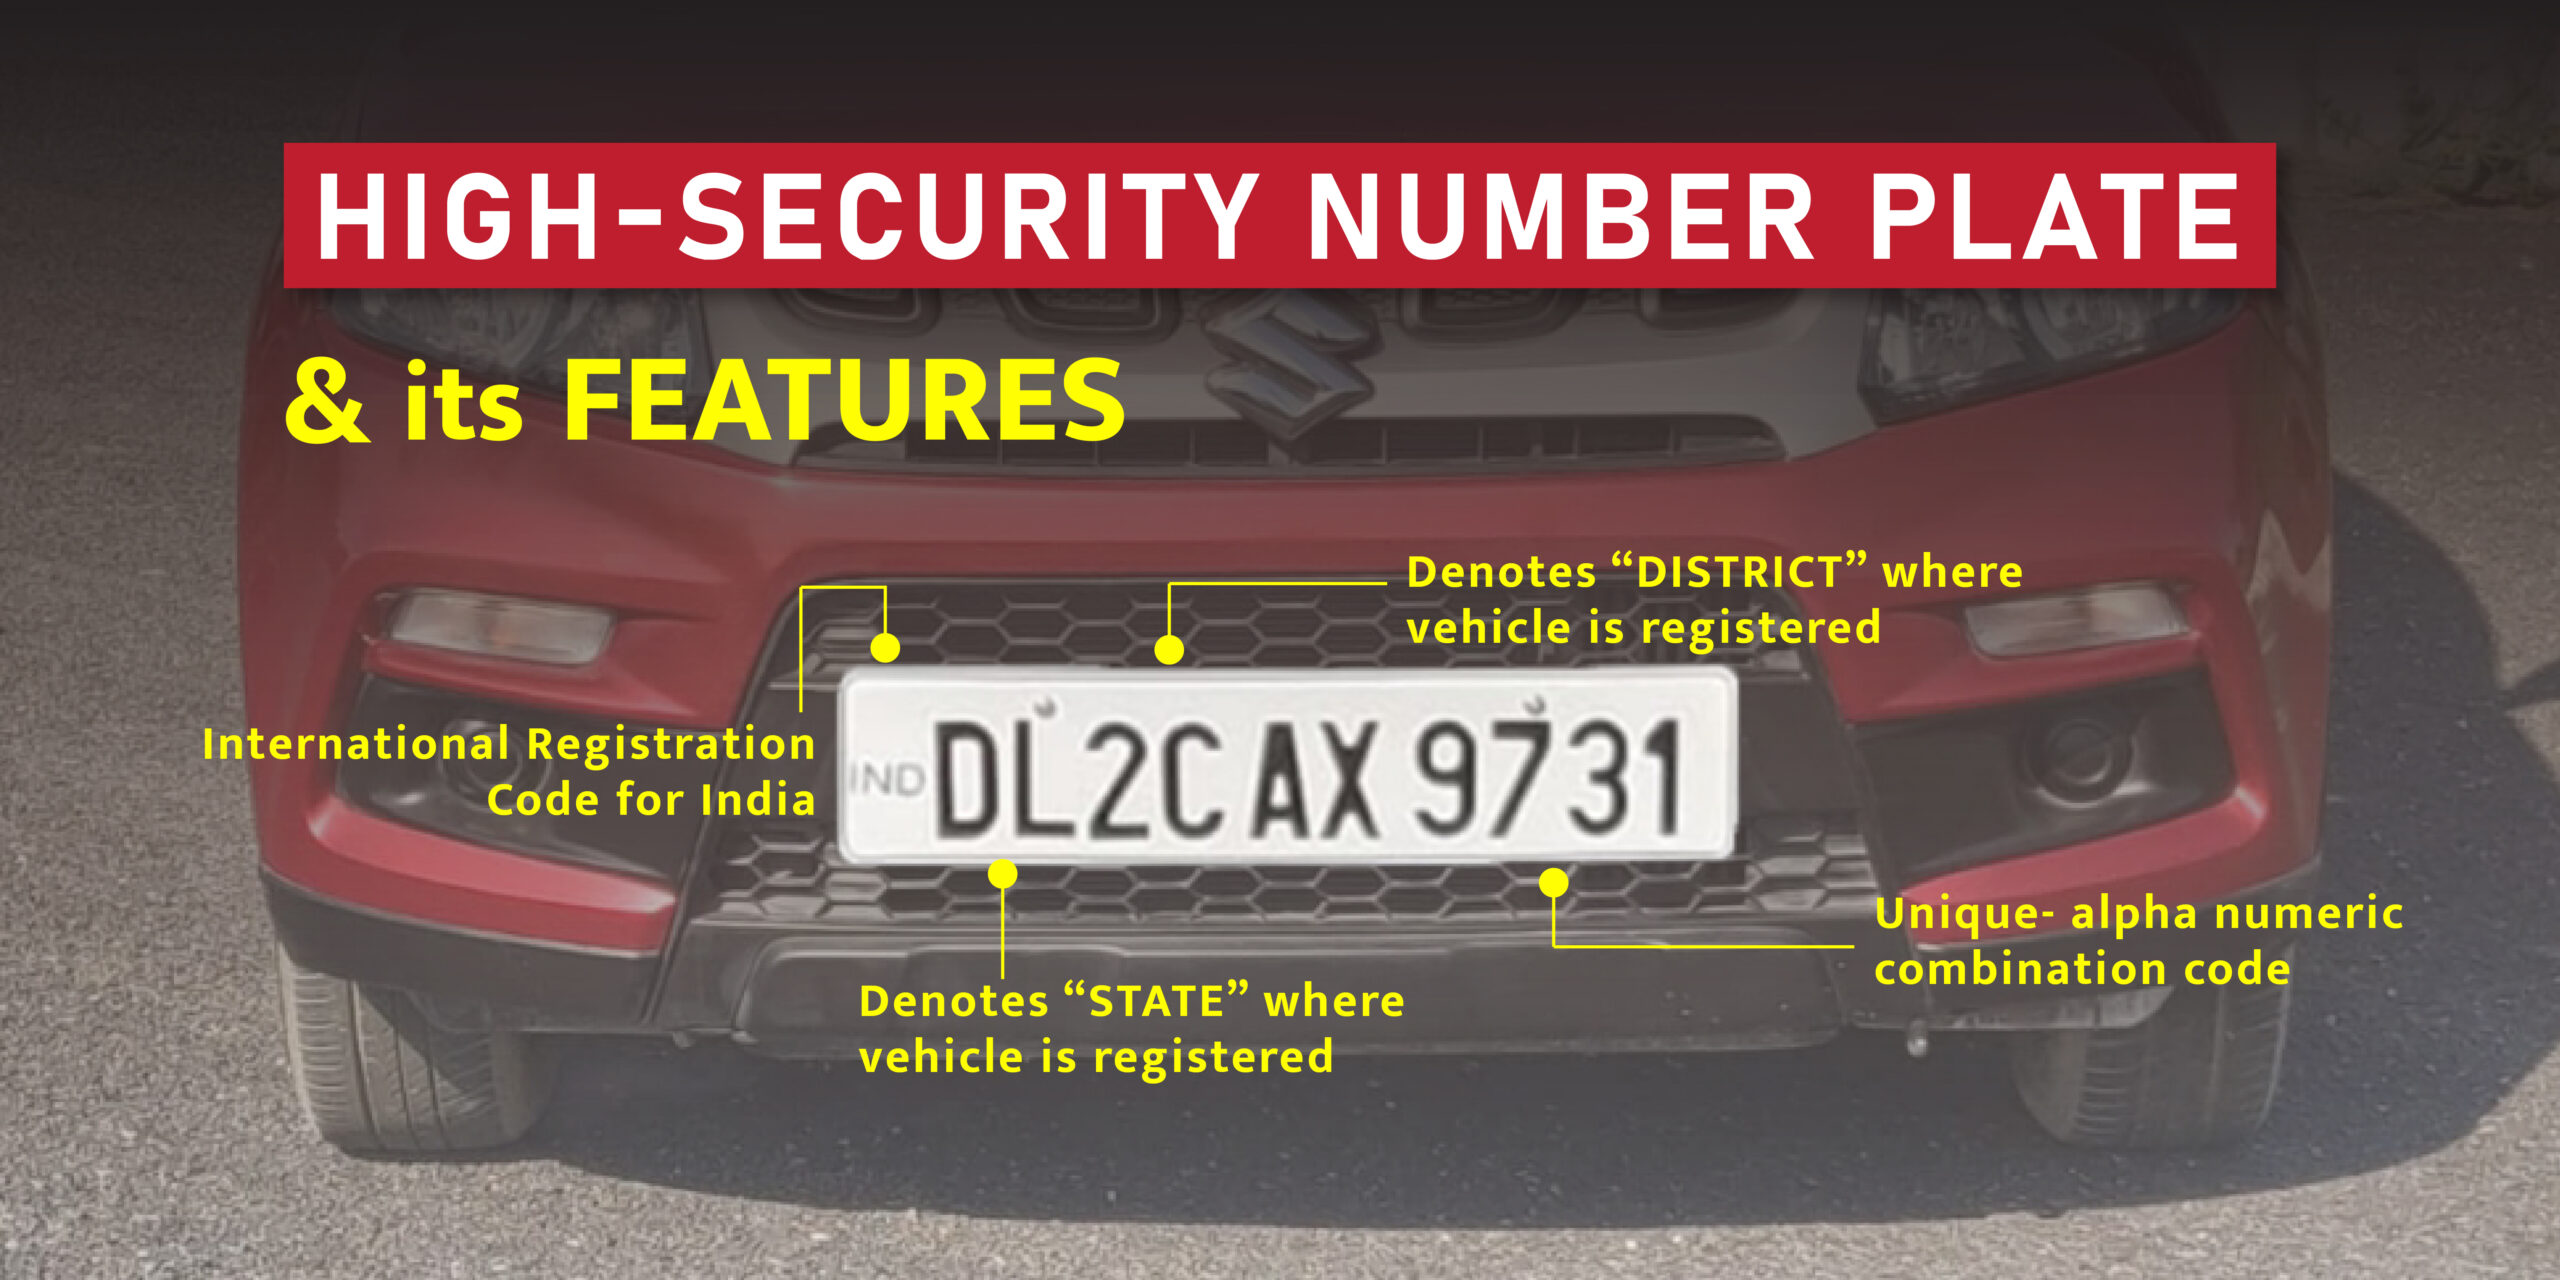 New High-Security Number Plate